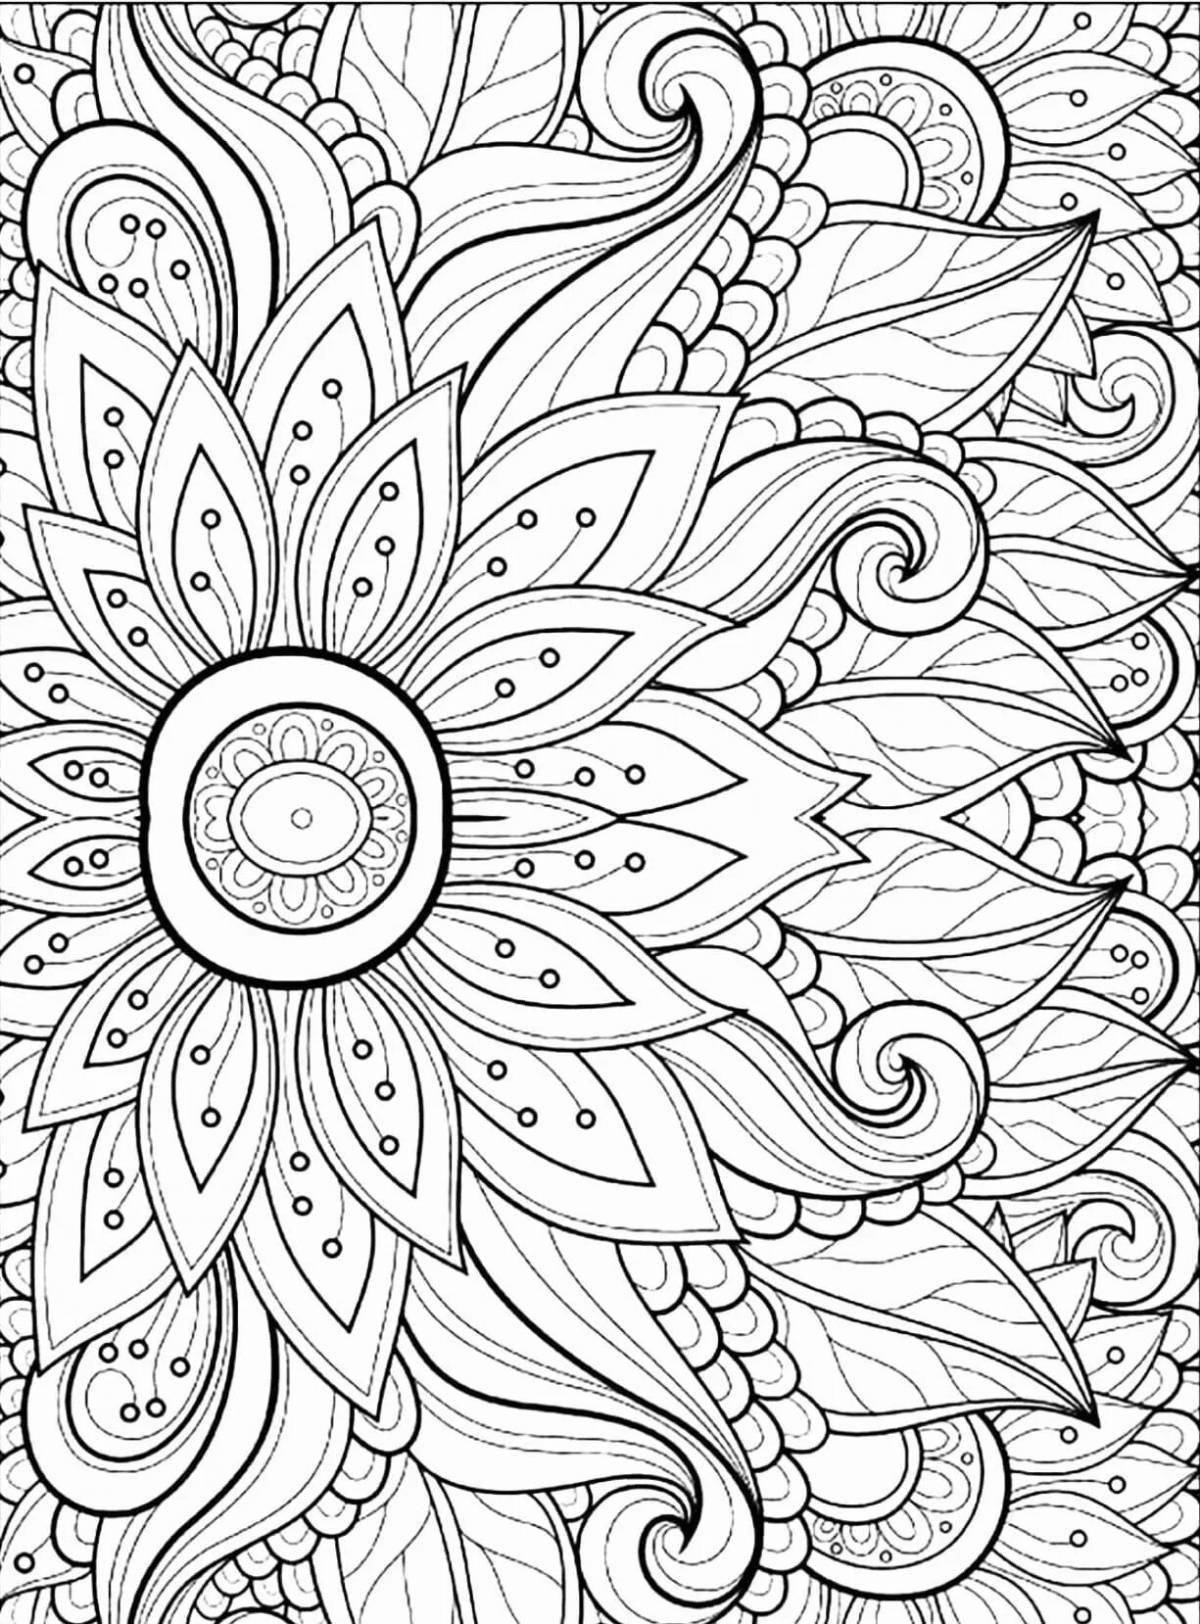 Stylish adult coloring book